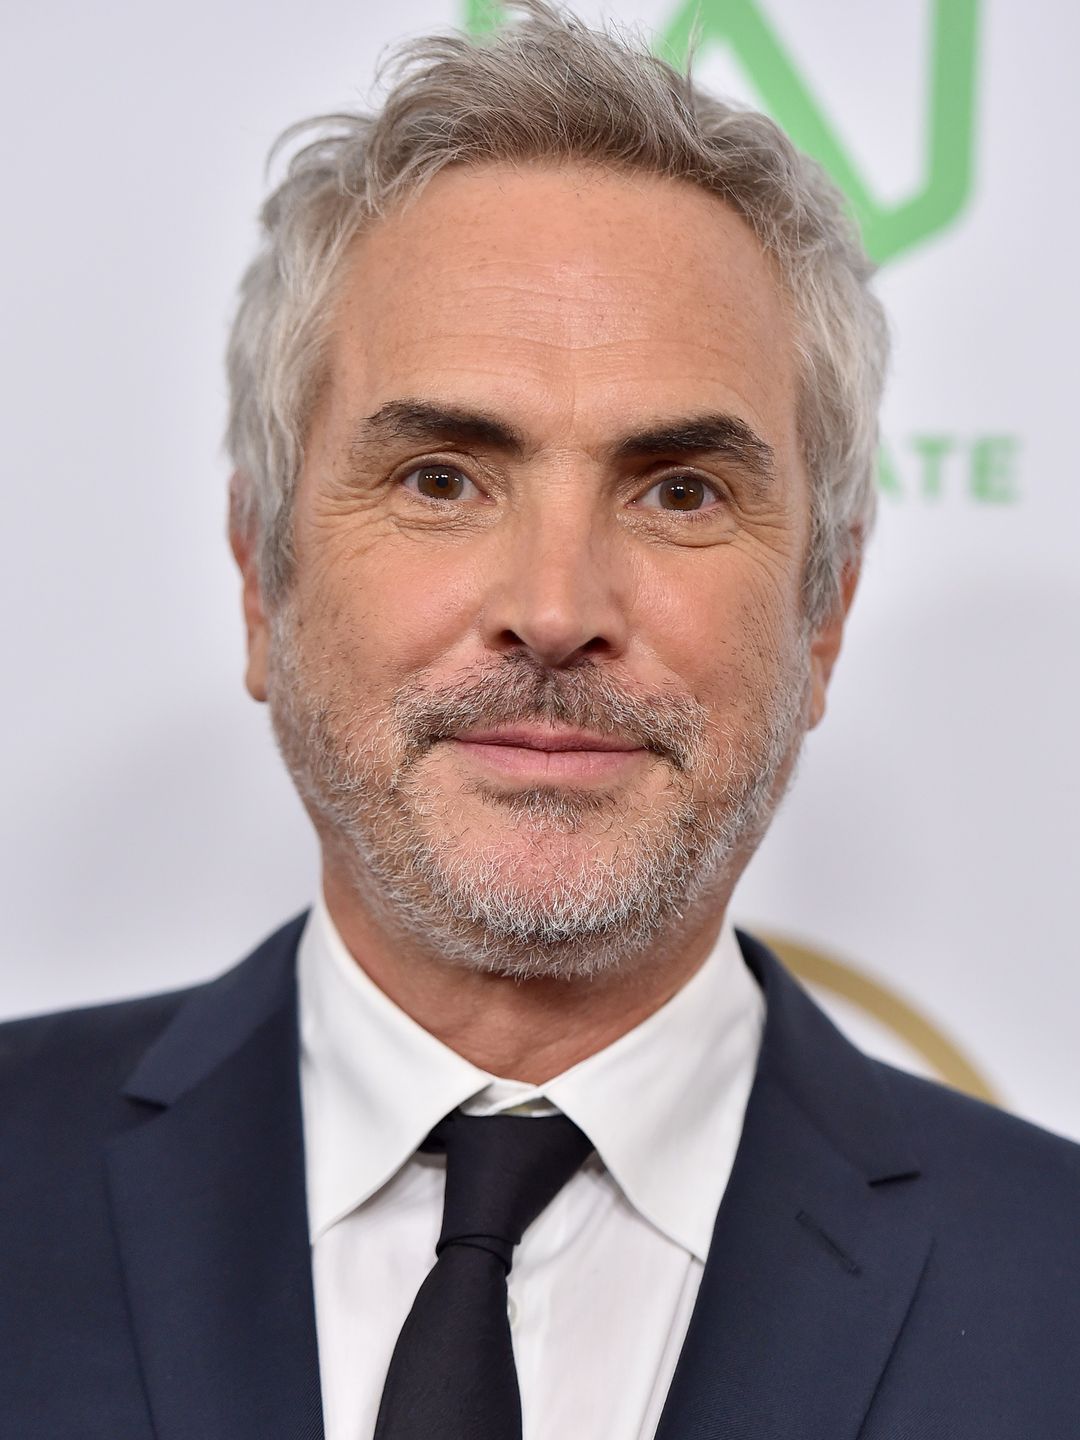 Alfonso Cuarón who are his parents